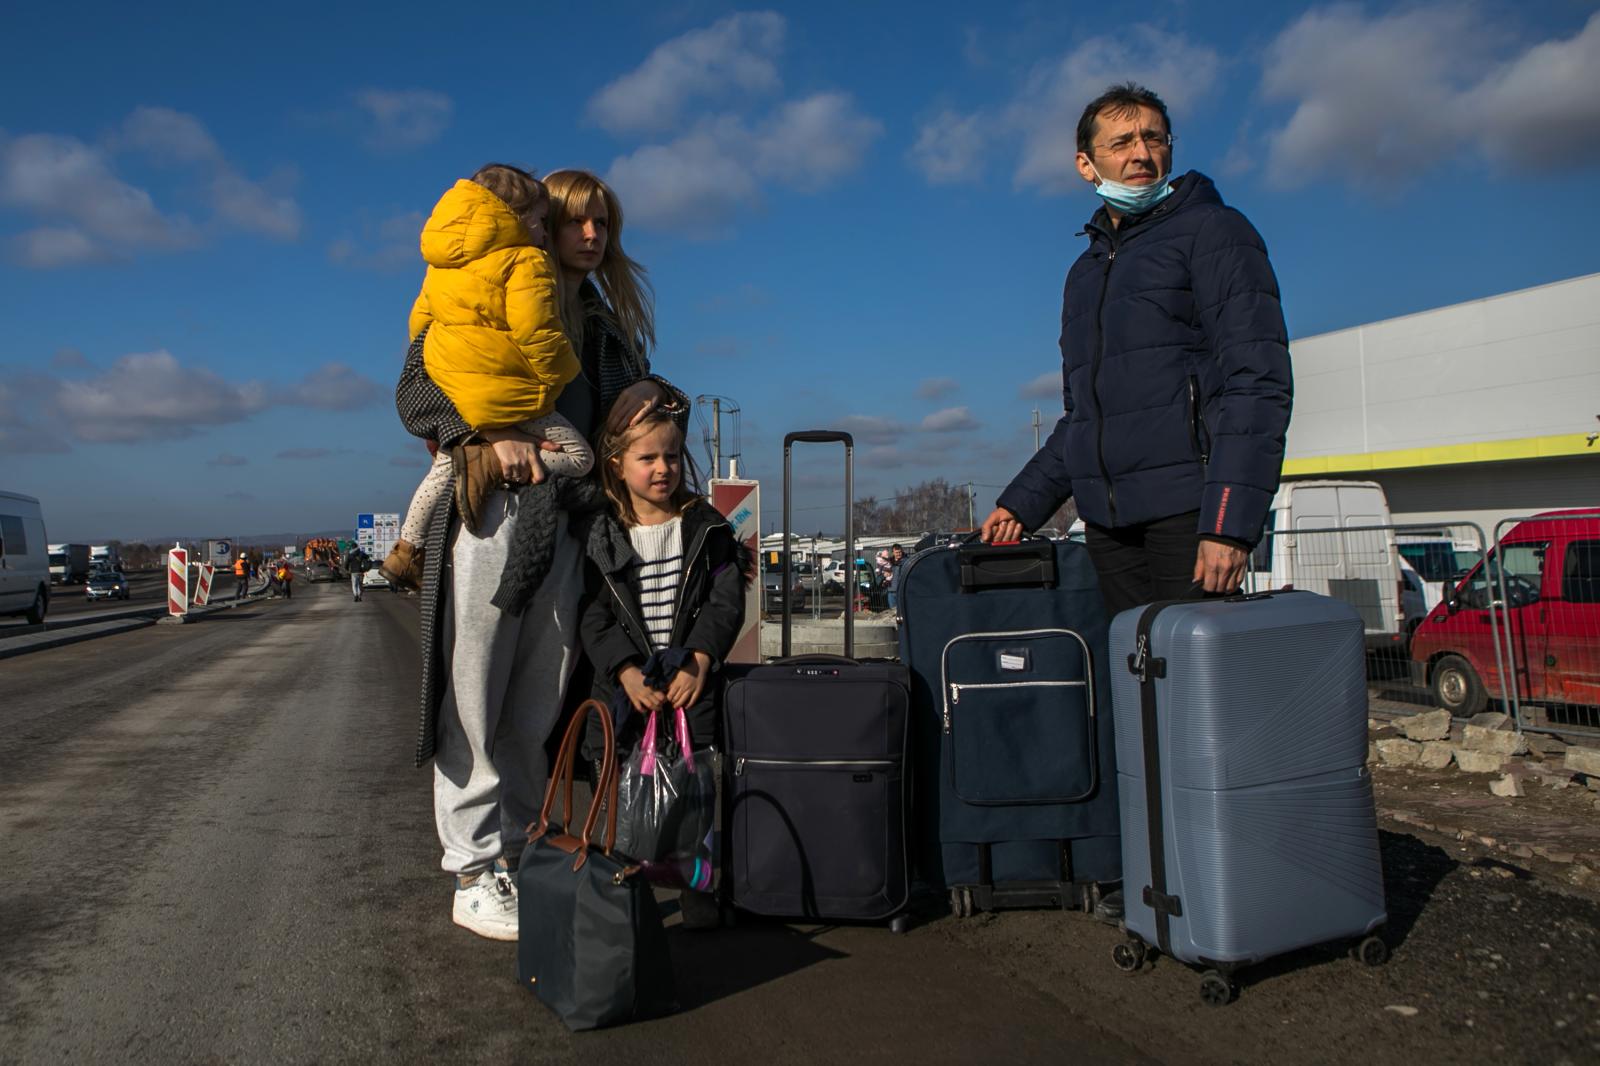 Over the border: Ukrainians in Poland (on assignment for The Globe and Mail)